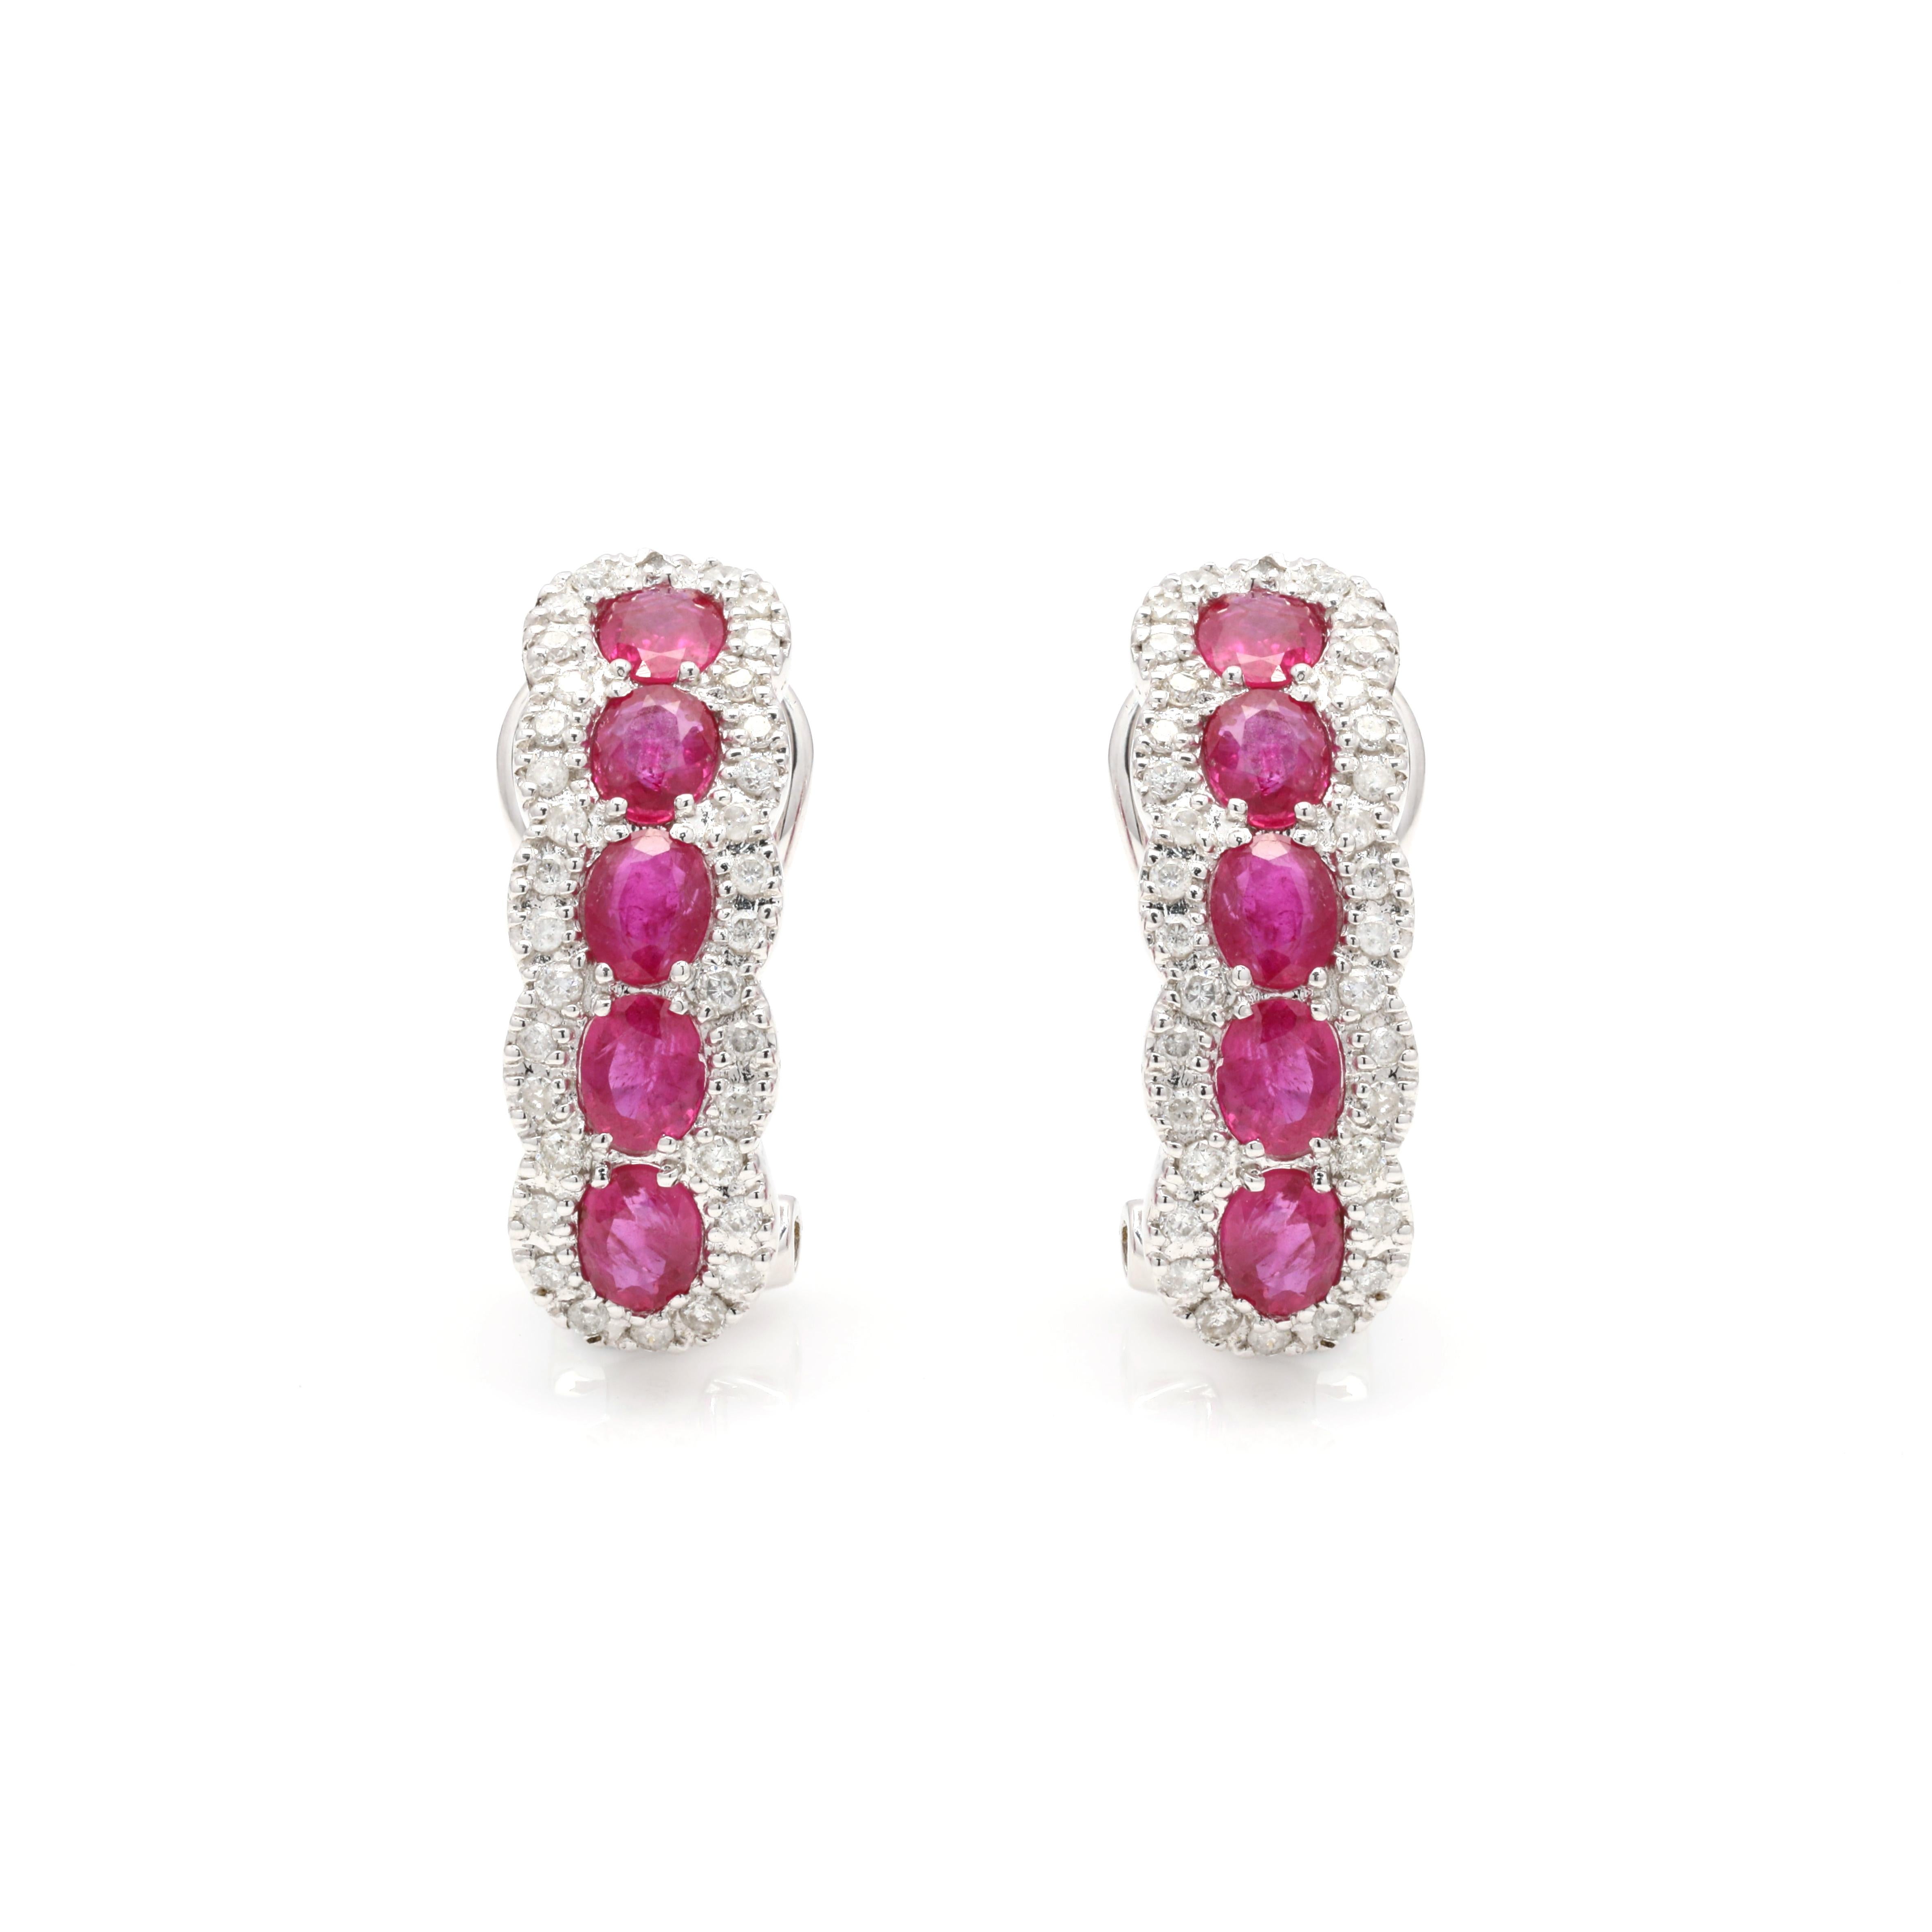 Natural Halo Diamond and Ruby Clip On Stud Earrings in 14K Gold. Embrace your look with these stunning pair of earrings suitable for any occasion to complete your outfit.
Ruby gemstone improves mental strength.
Featuring 1.92 carats of oval ruby